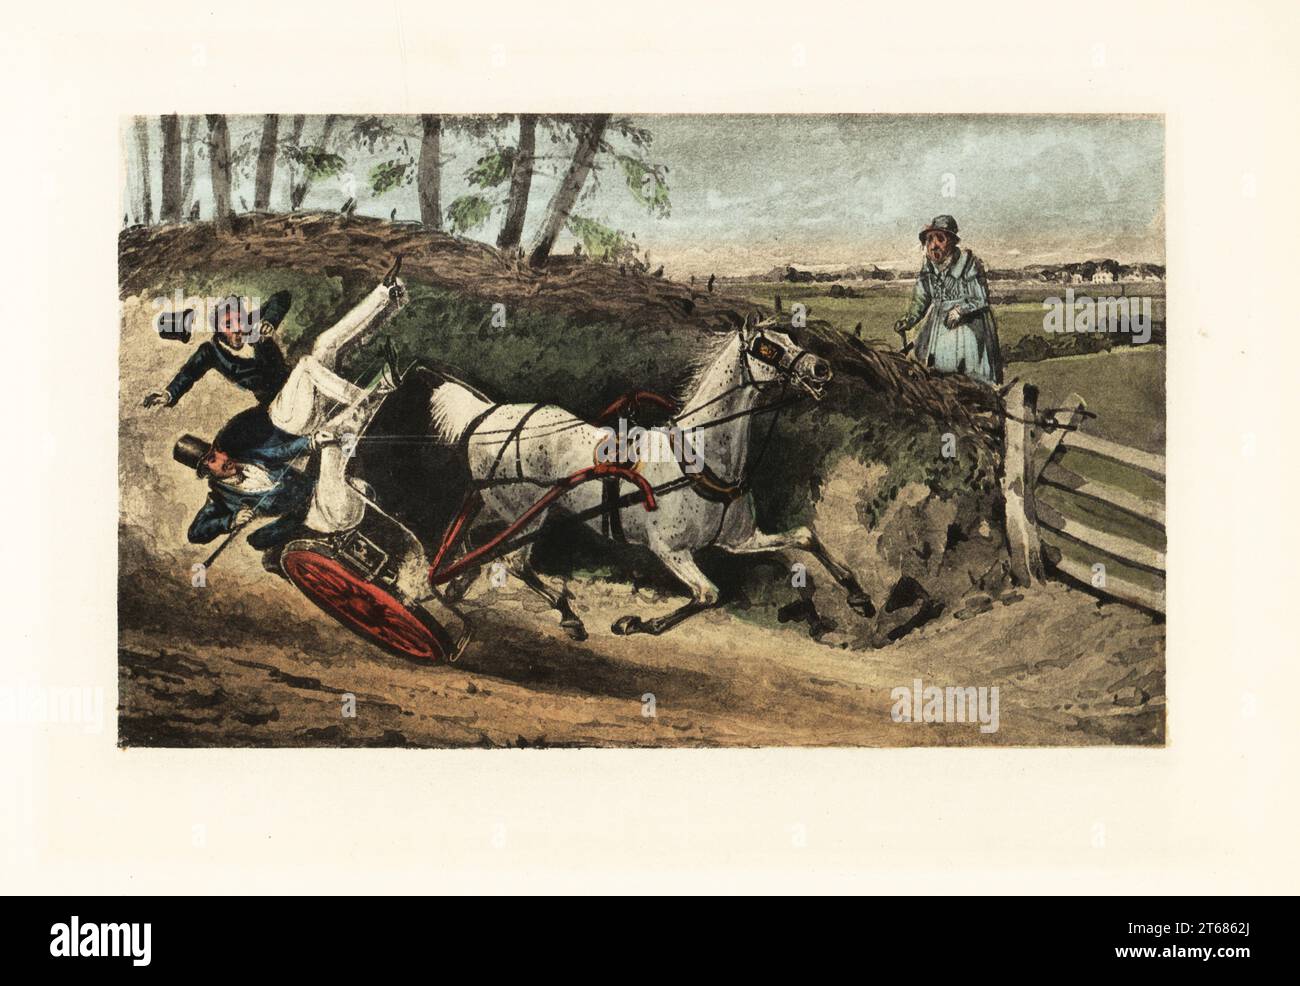 Victorian English gentlemen thrown from a one-horse gig on a country lane. A farmer in smock watches from a field. What! Never upset in a gig? Chromolithographic facsimile of an illustration by Henry Thomas Alken from Memoirs of the Life of the Late John Mytton by Nimrod aka Charles James Apperley, Kegan Paul, London, 1900. Stock Photo